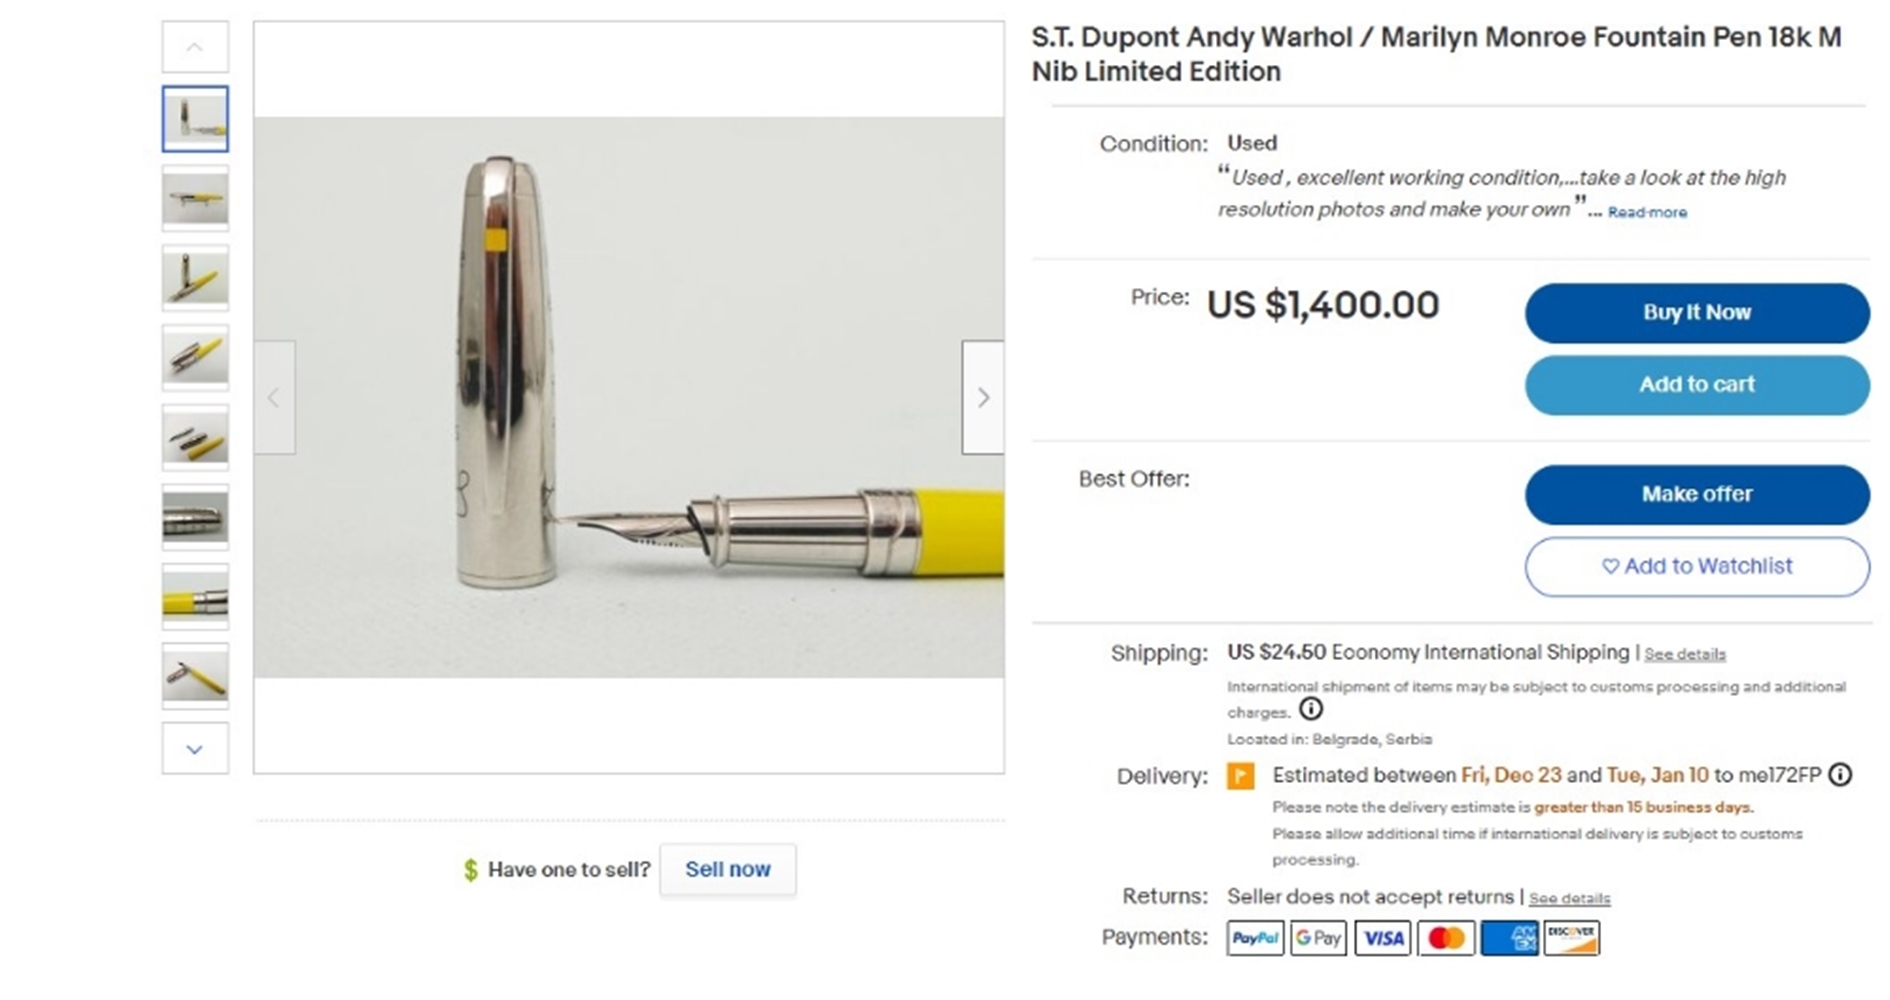 SOLD VIA BUY IT NOW PLEASE DO NOT BID-Rare St Dupont Andy Warhol Fountain Pen Yellow Box & Papers - Image 12 of 13